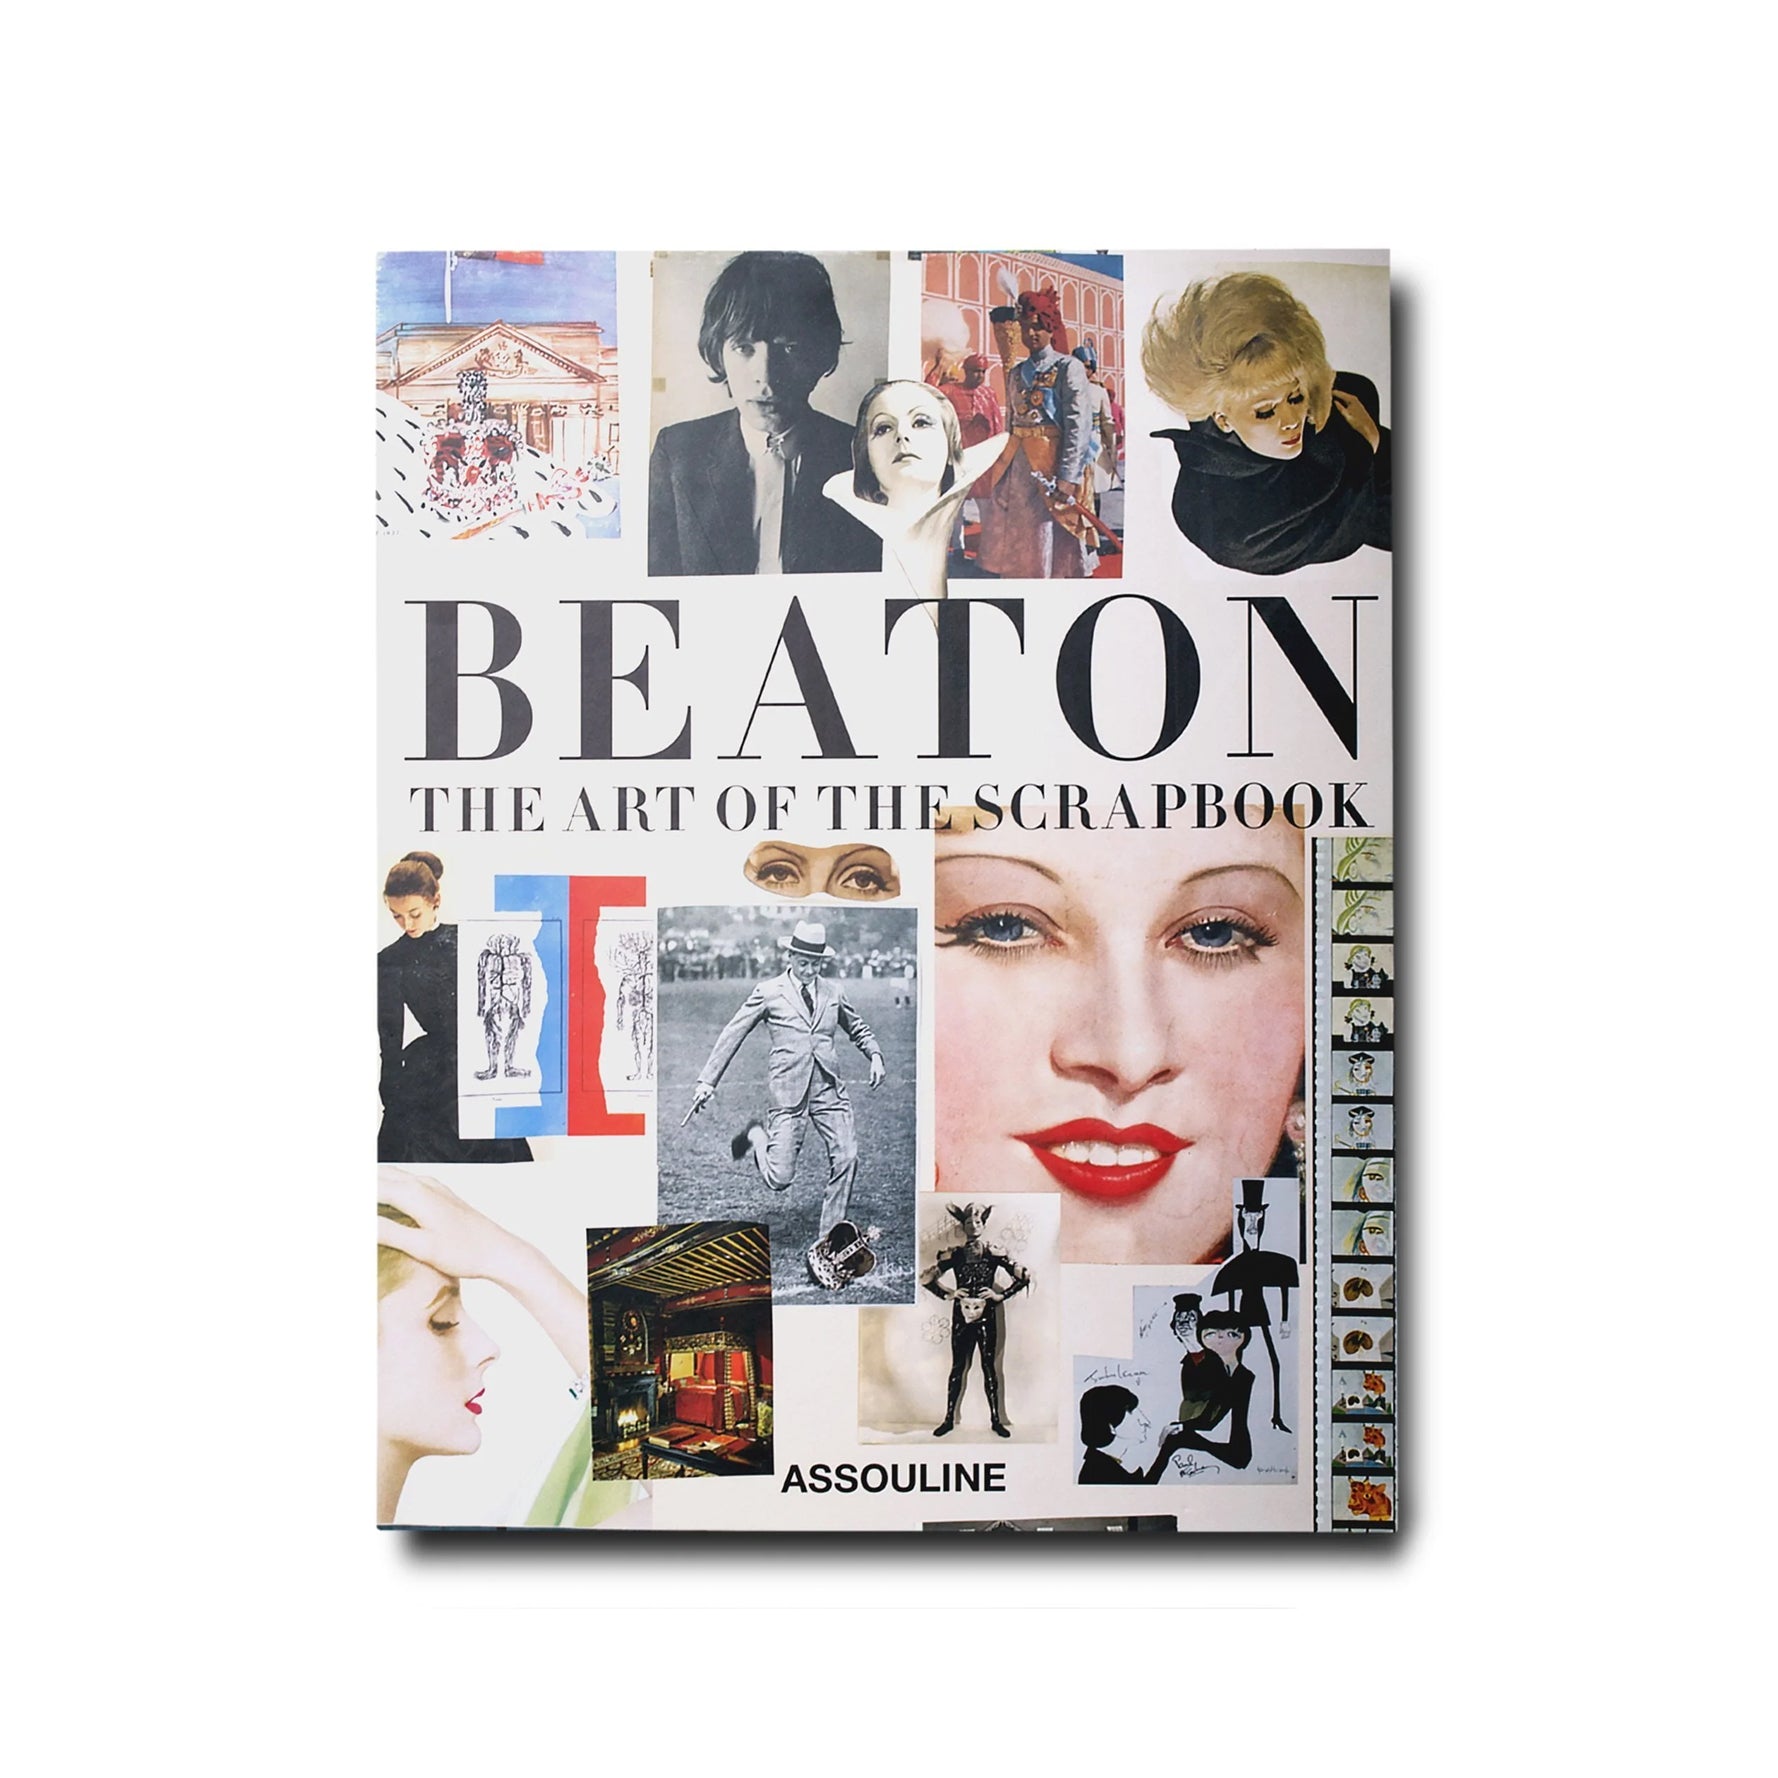 Cecil Beaton: The Art of the Scrapbook by Assouline